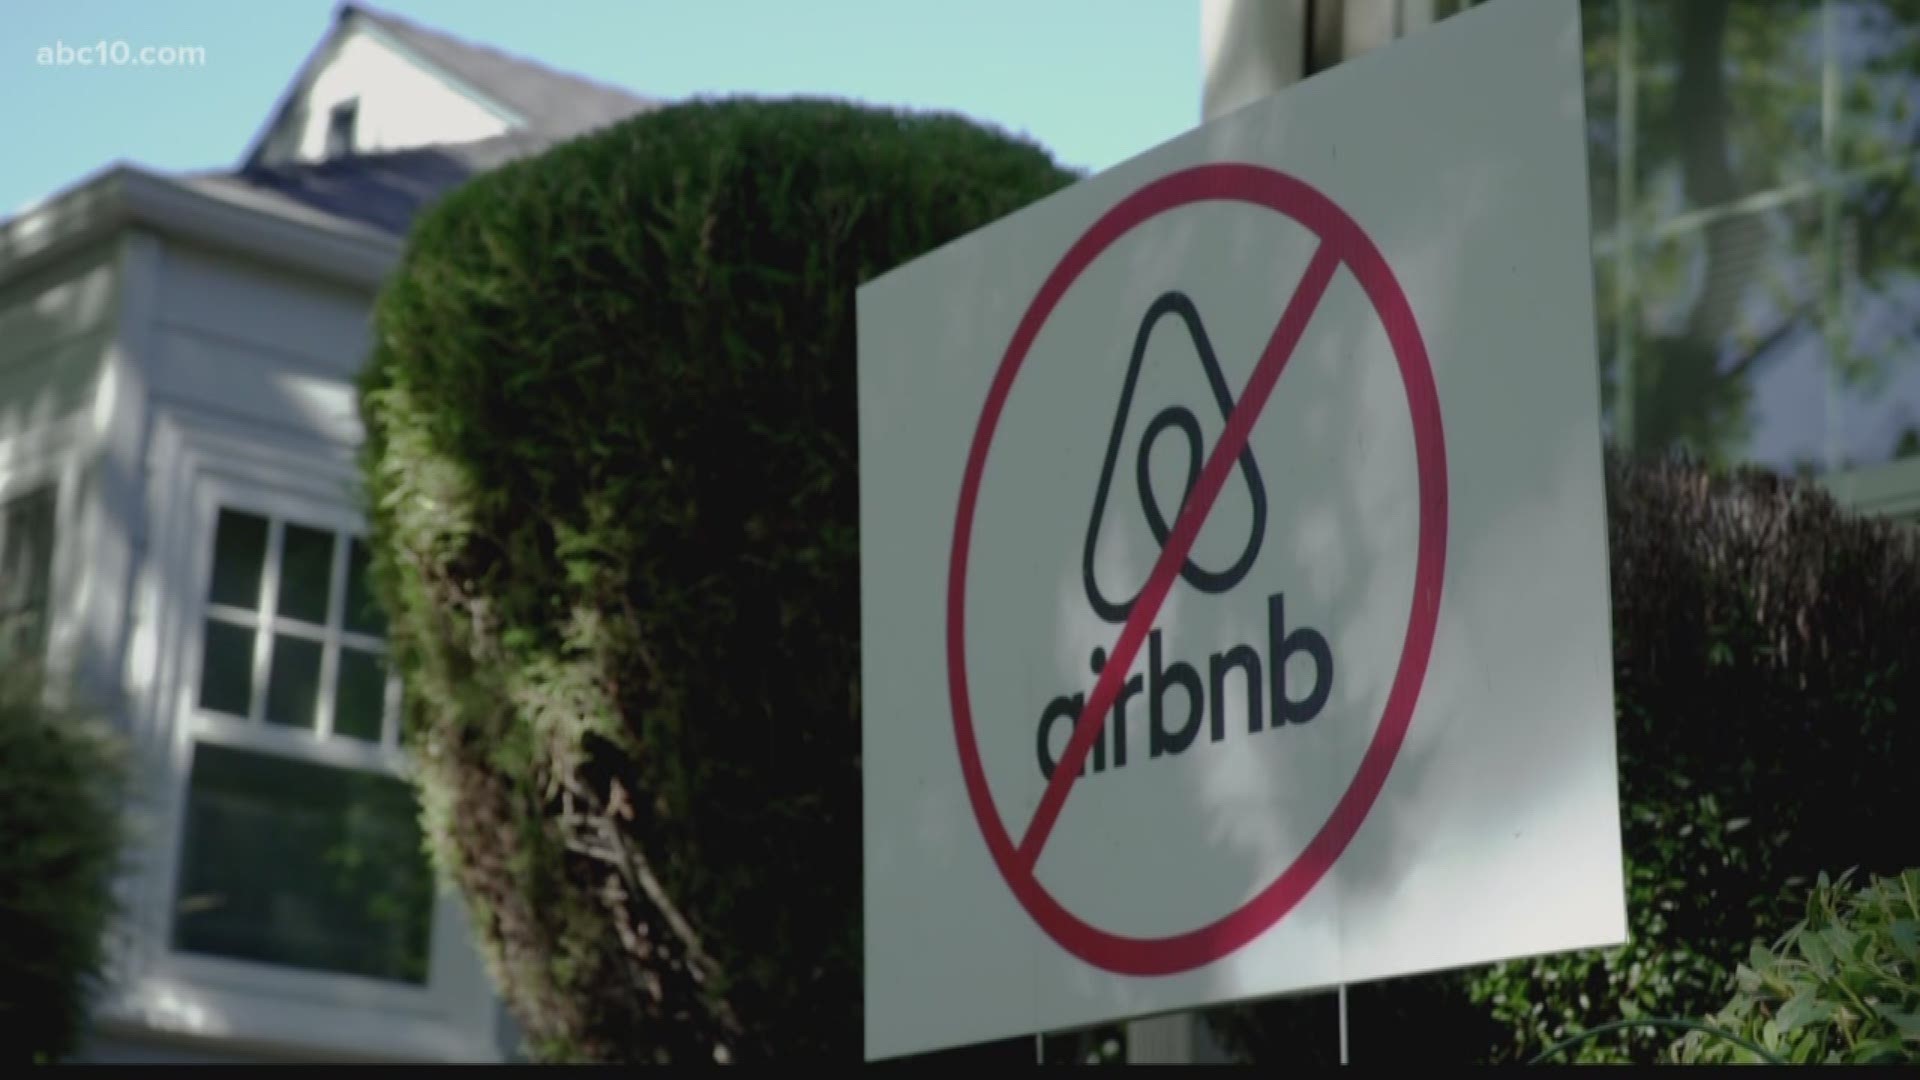 East Sacramento residents are showing their displeasure for Airbnb.